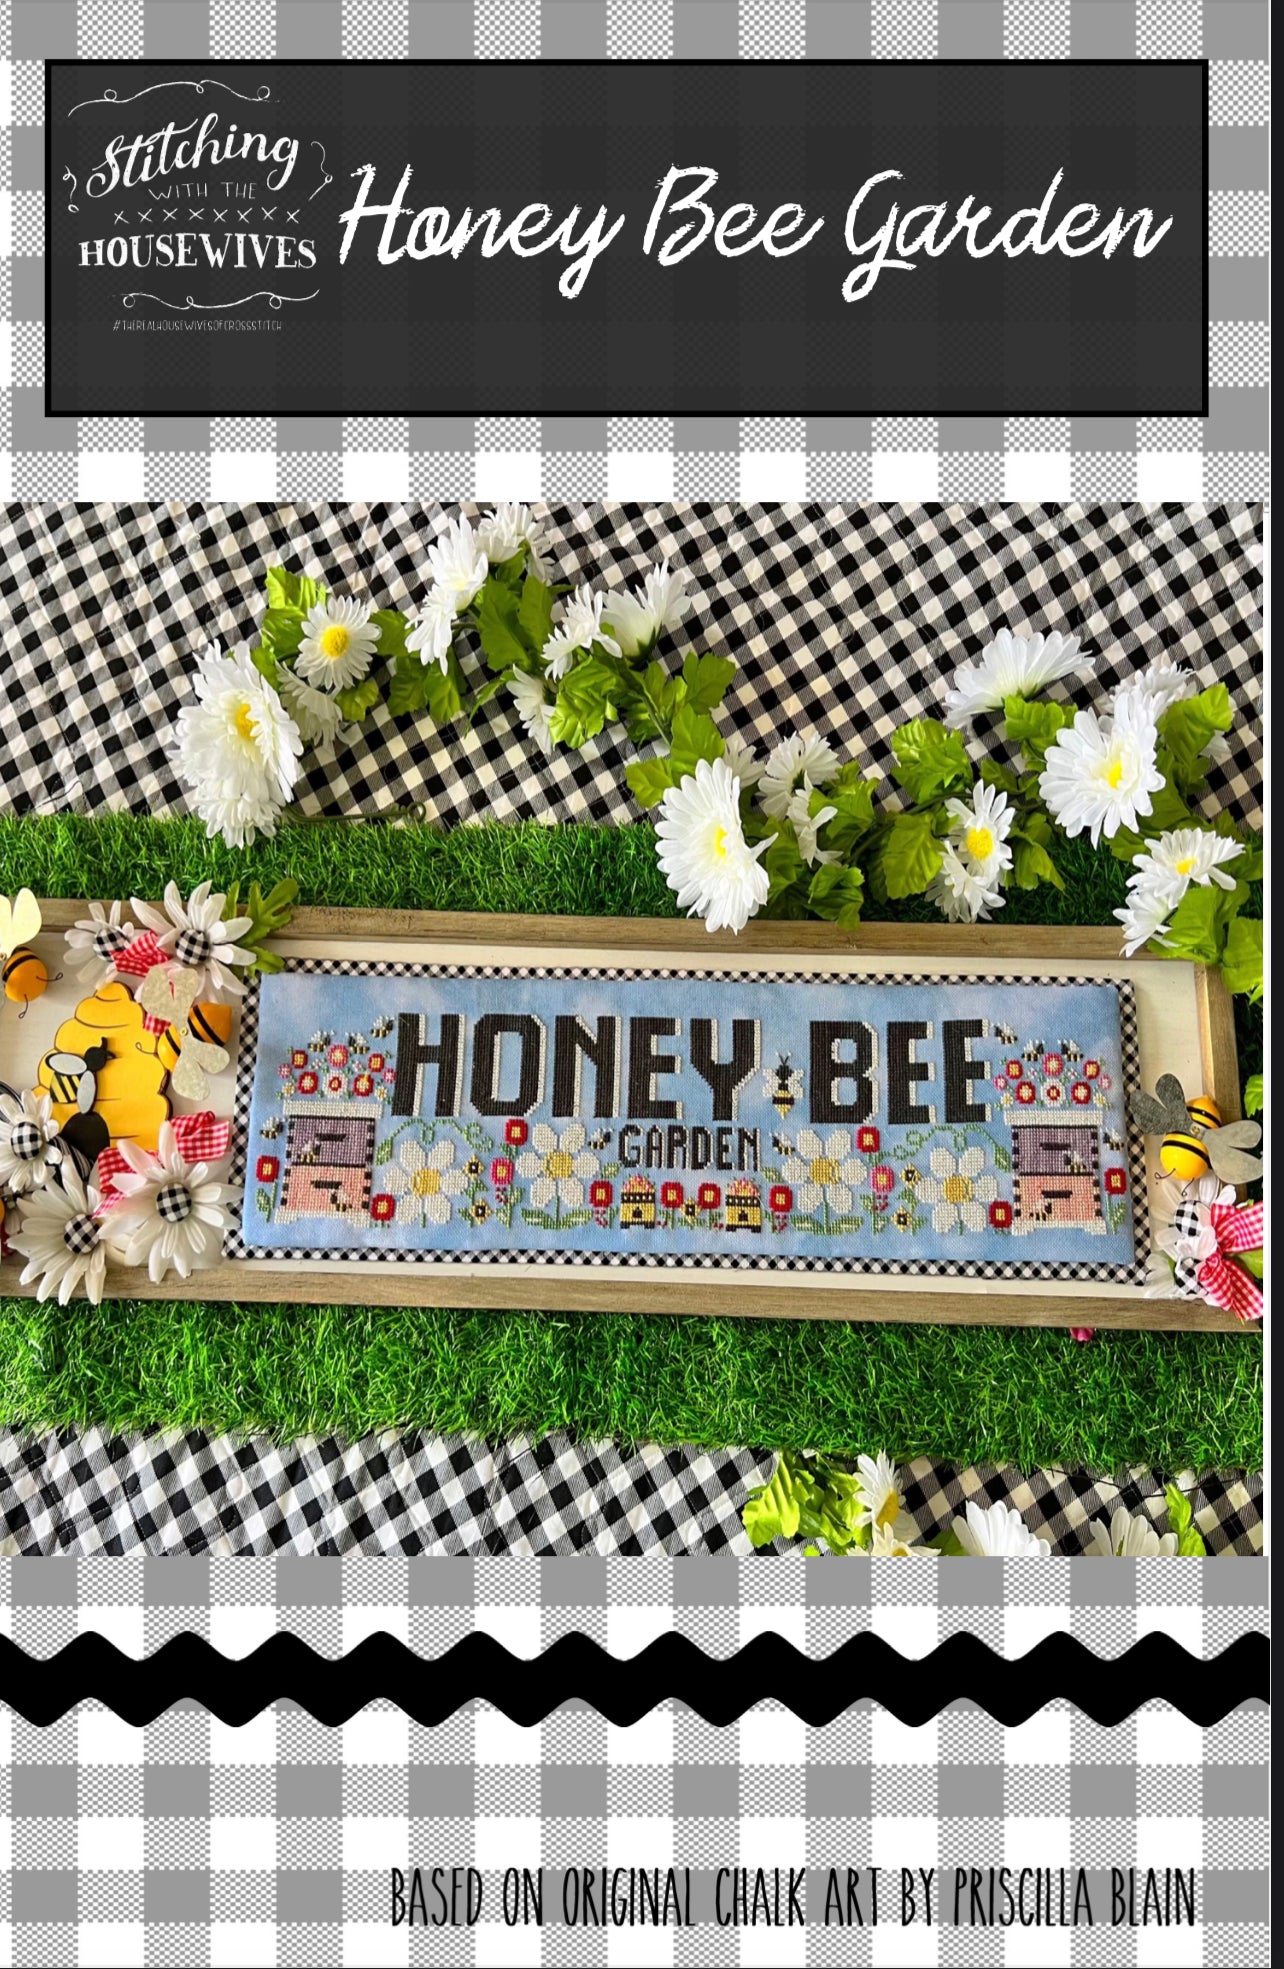 Honey Bee Garden by Stitching with the Housewives